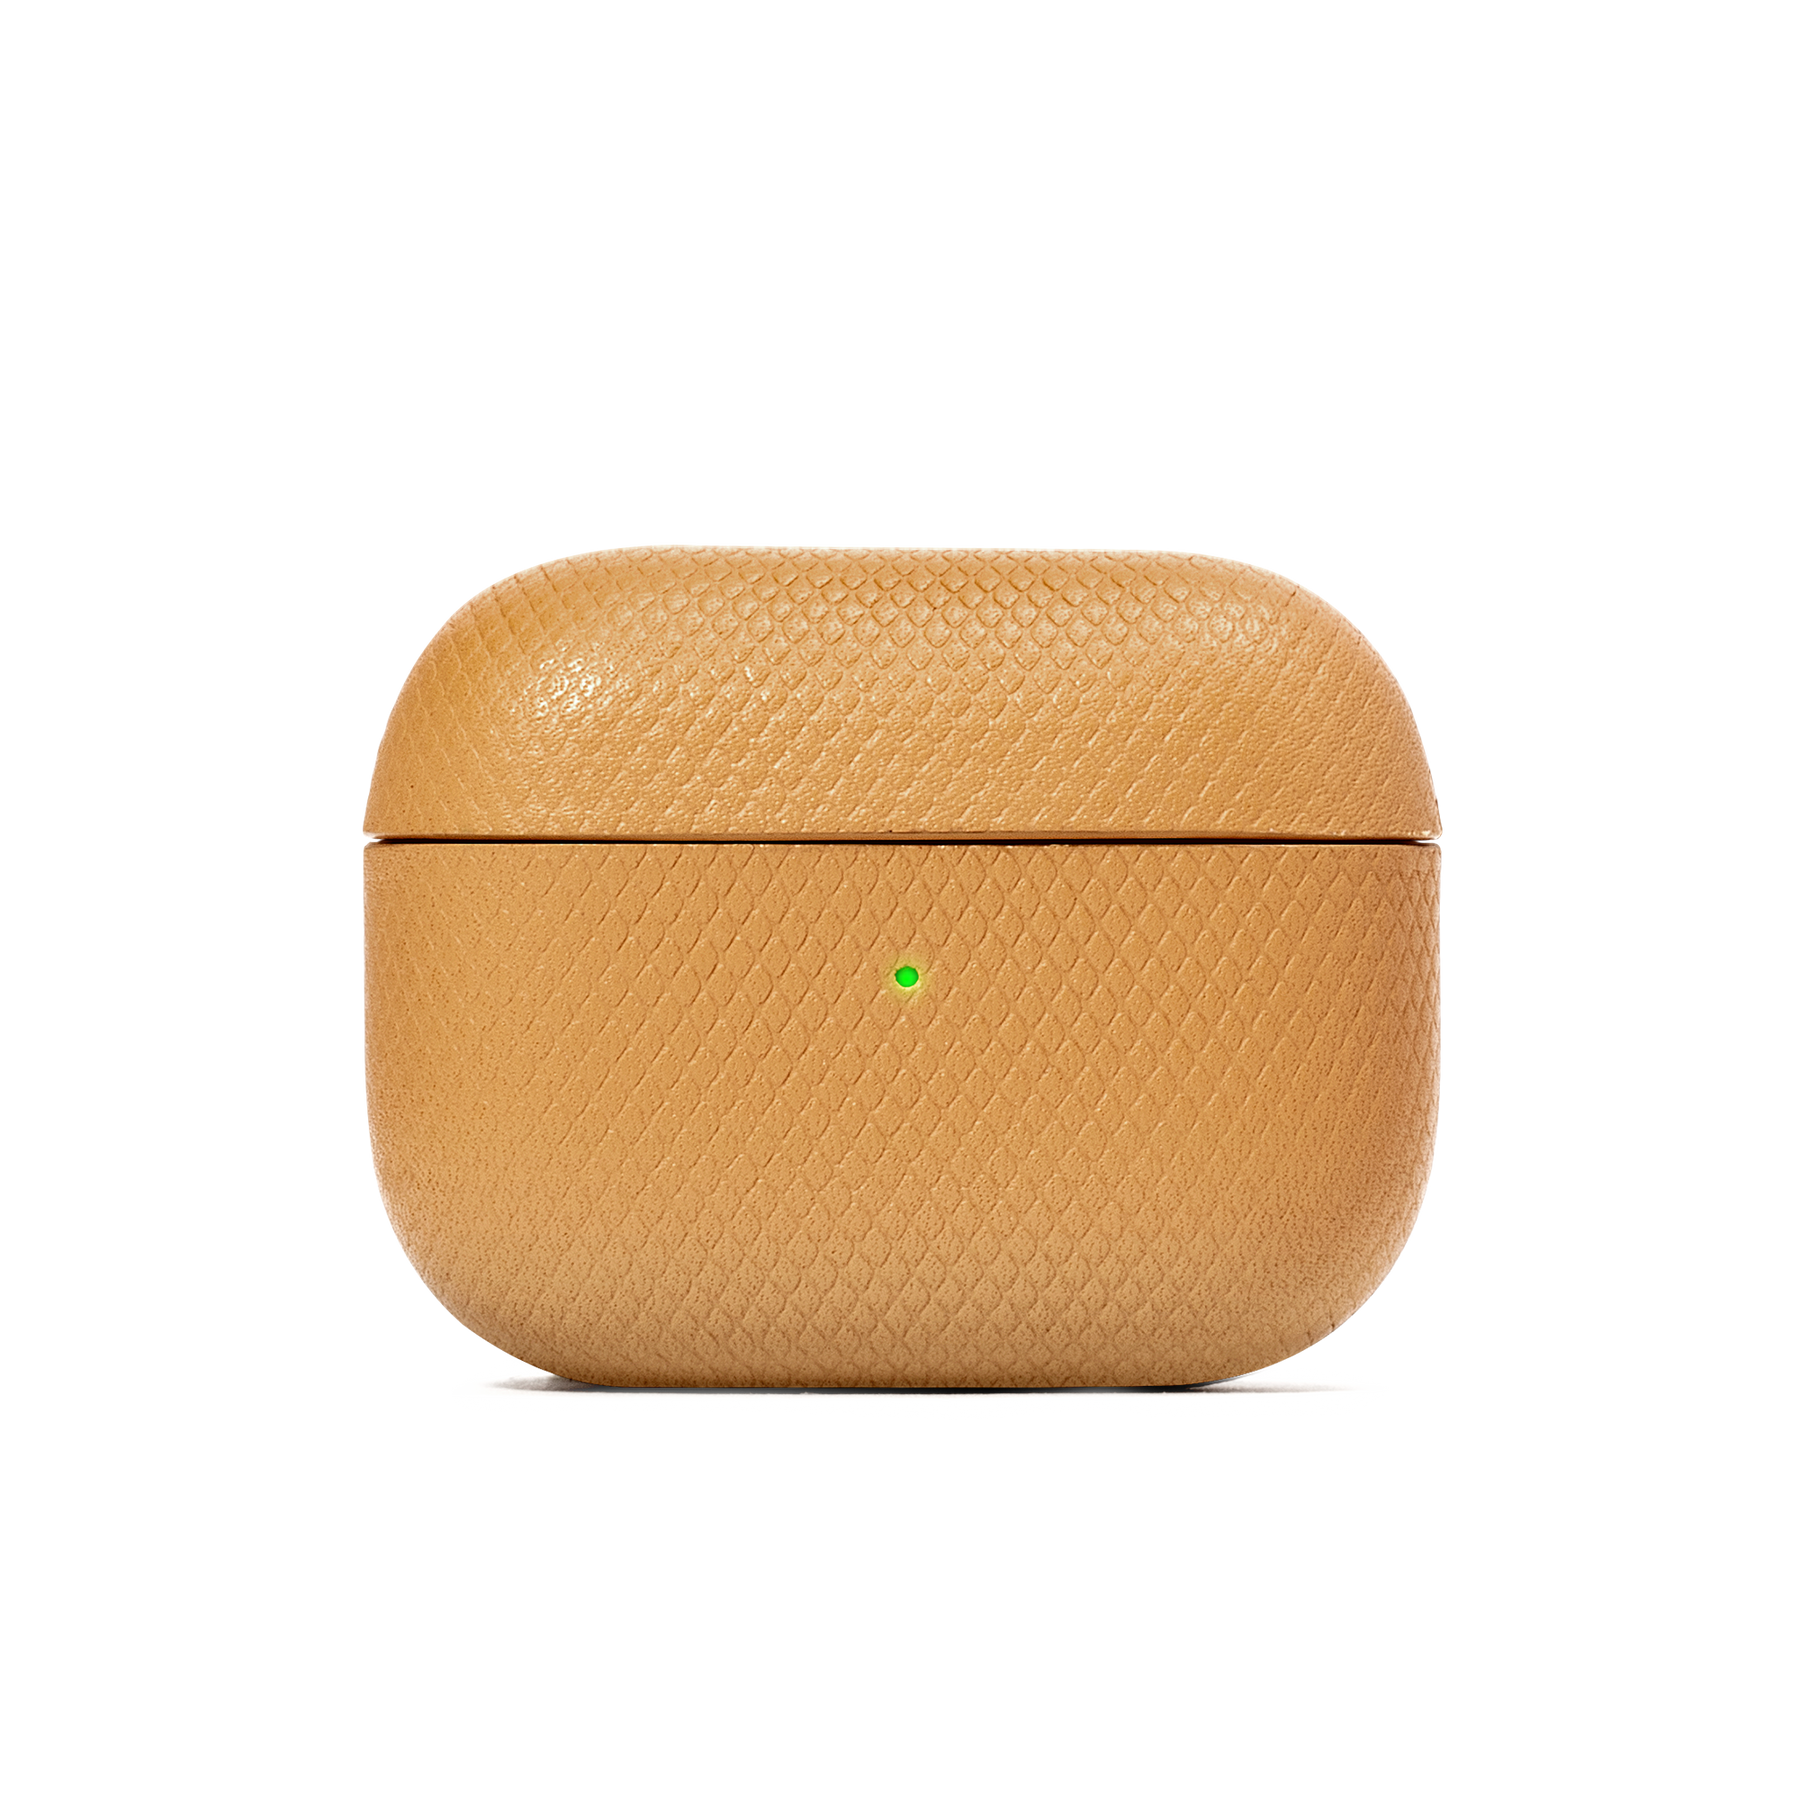 34408251916427,Heritage Case for AirPods Pro - Ocre